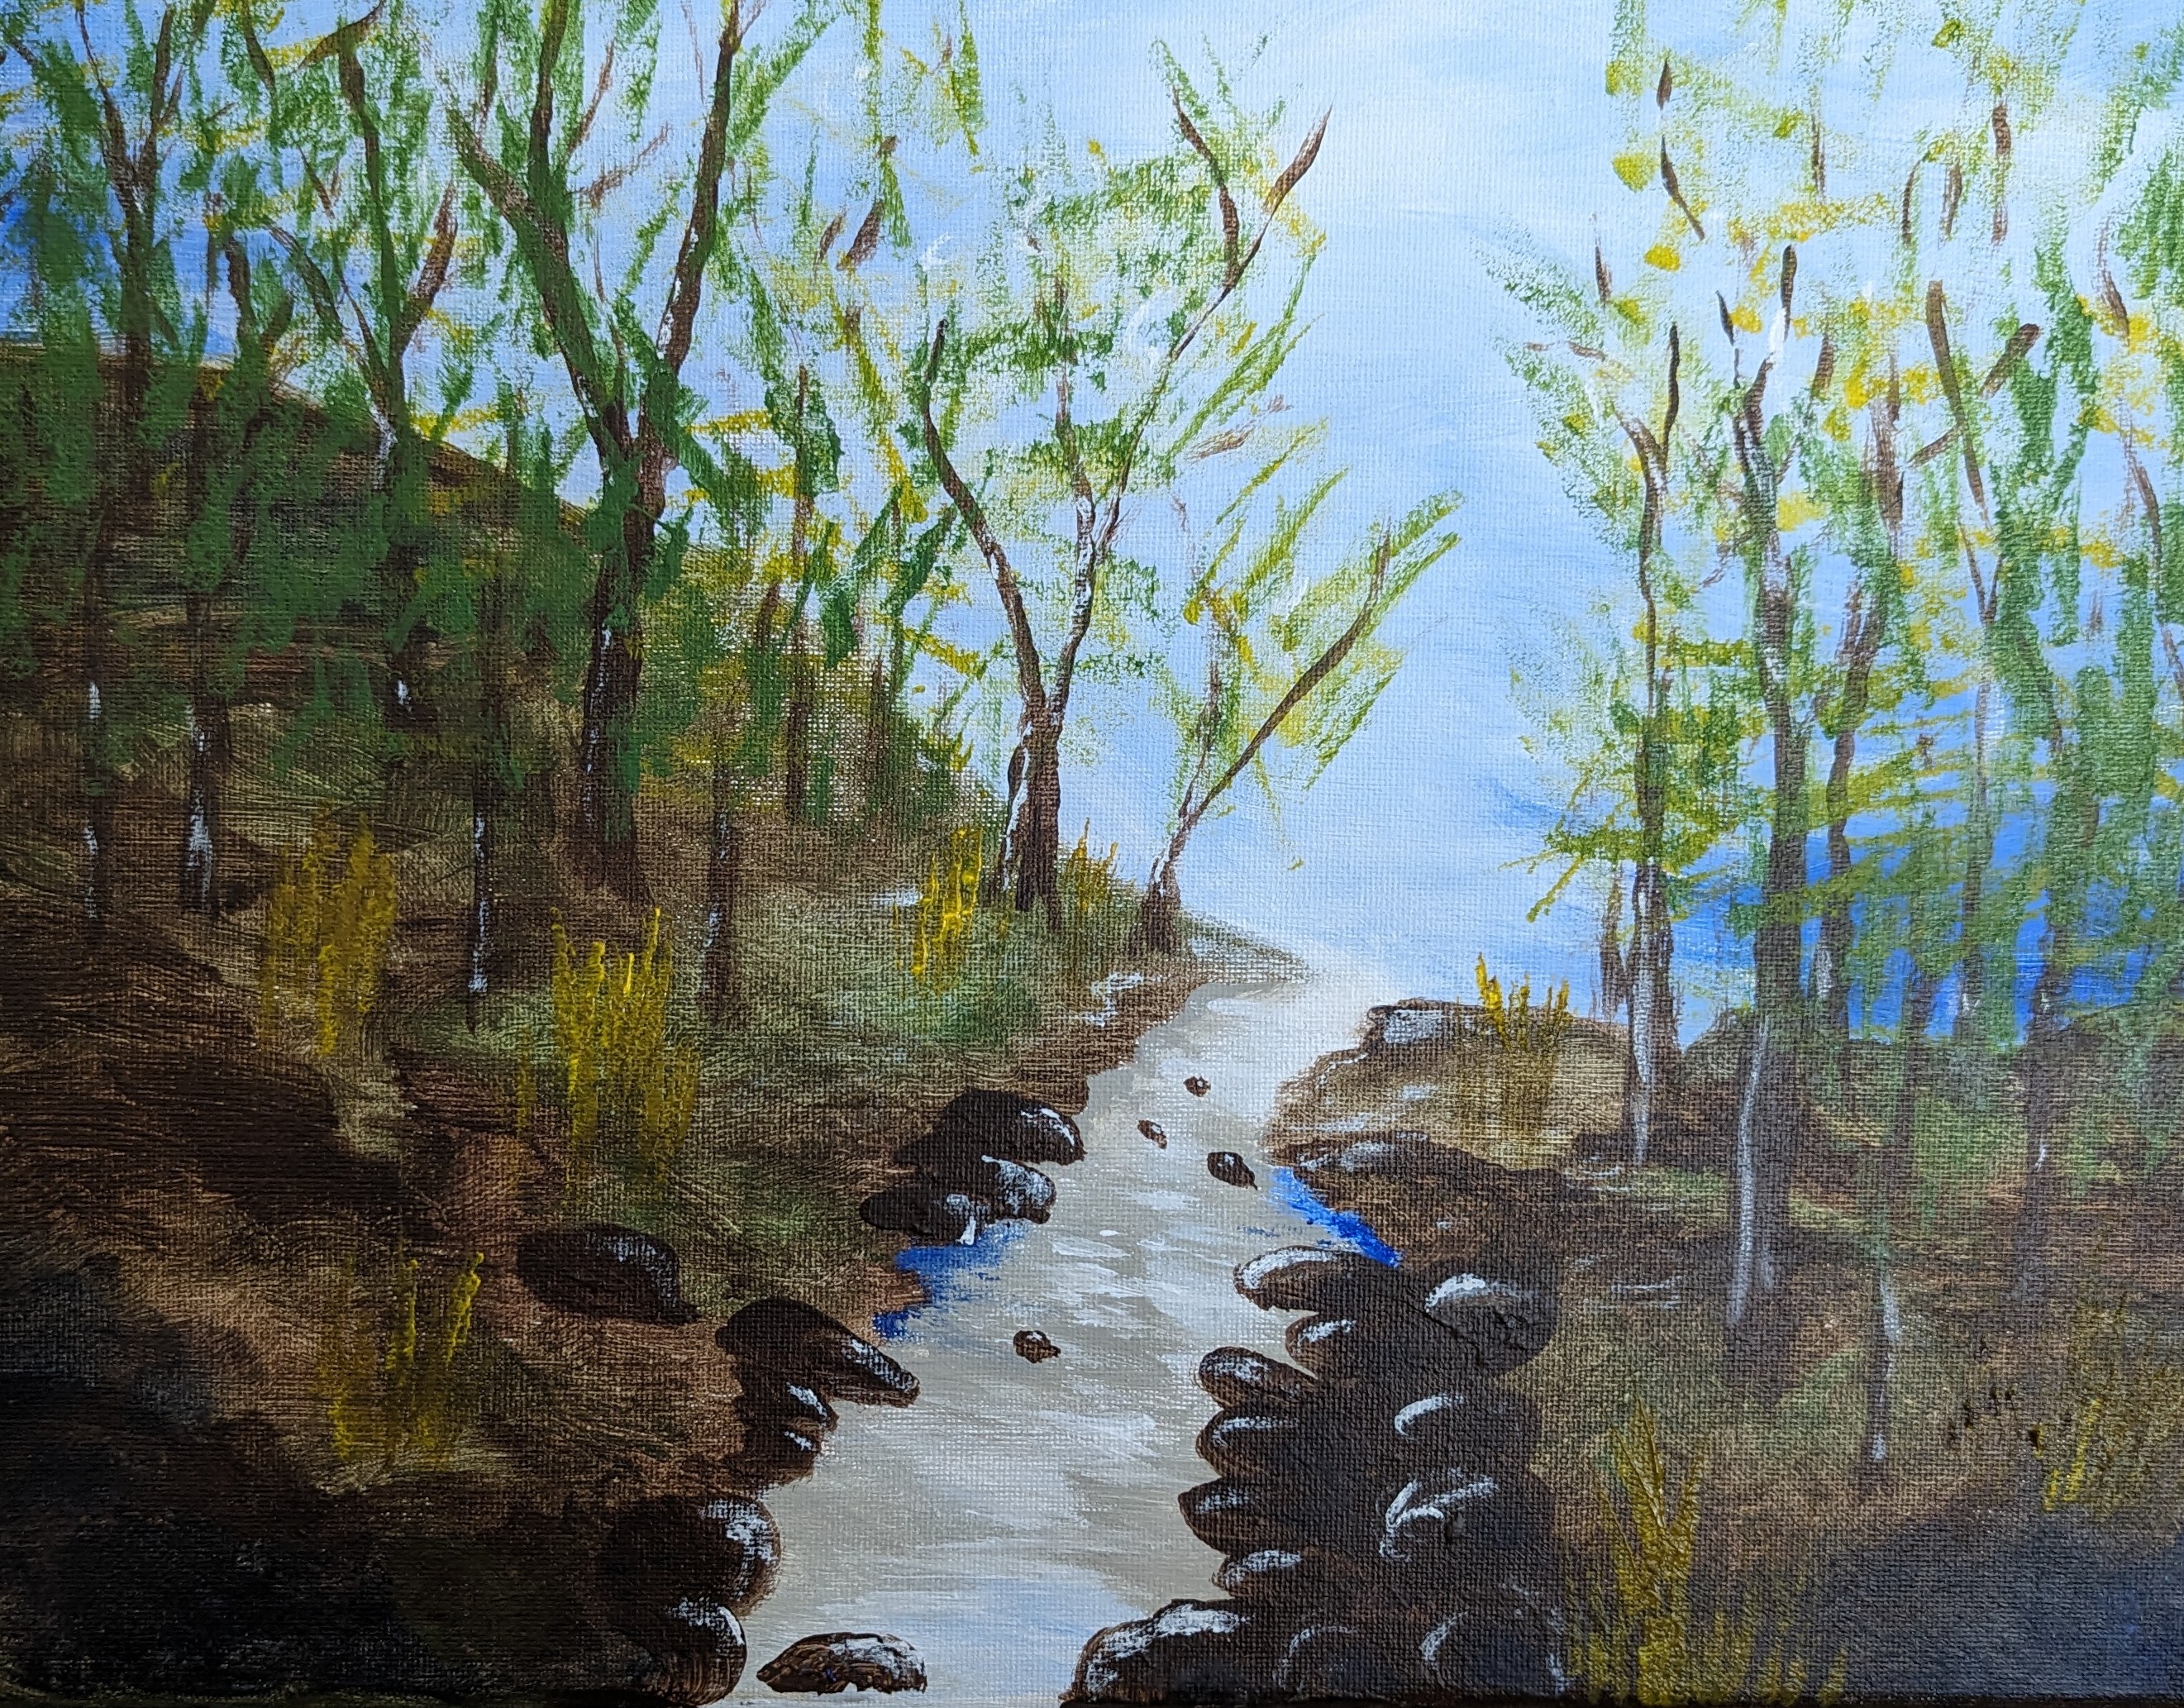 Painting of River through a forest